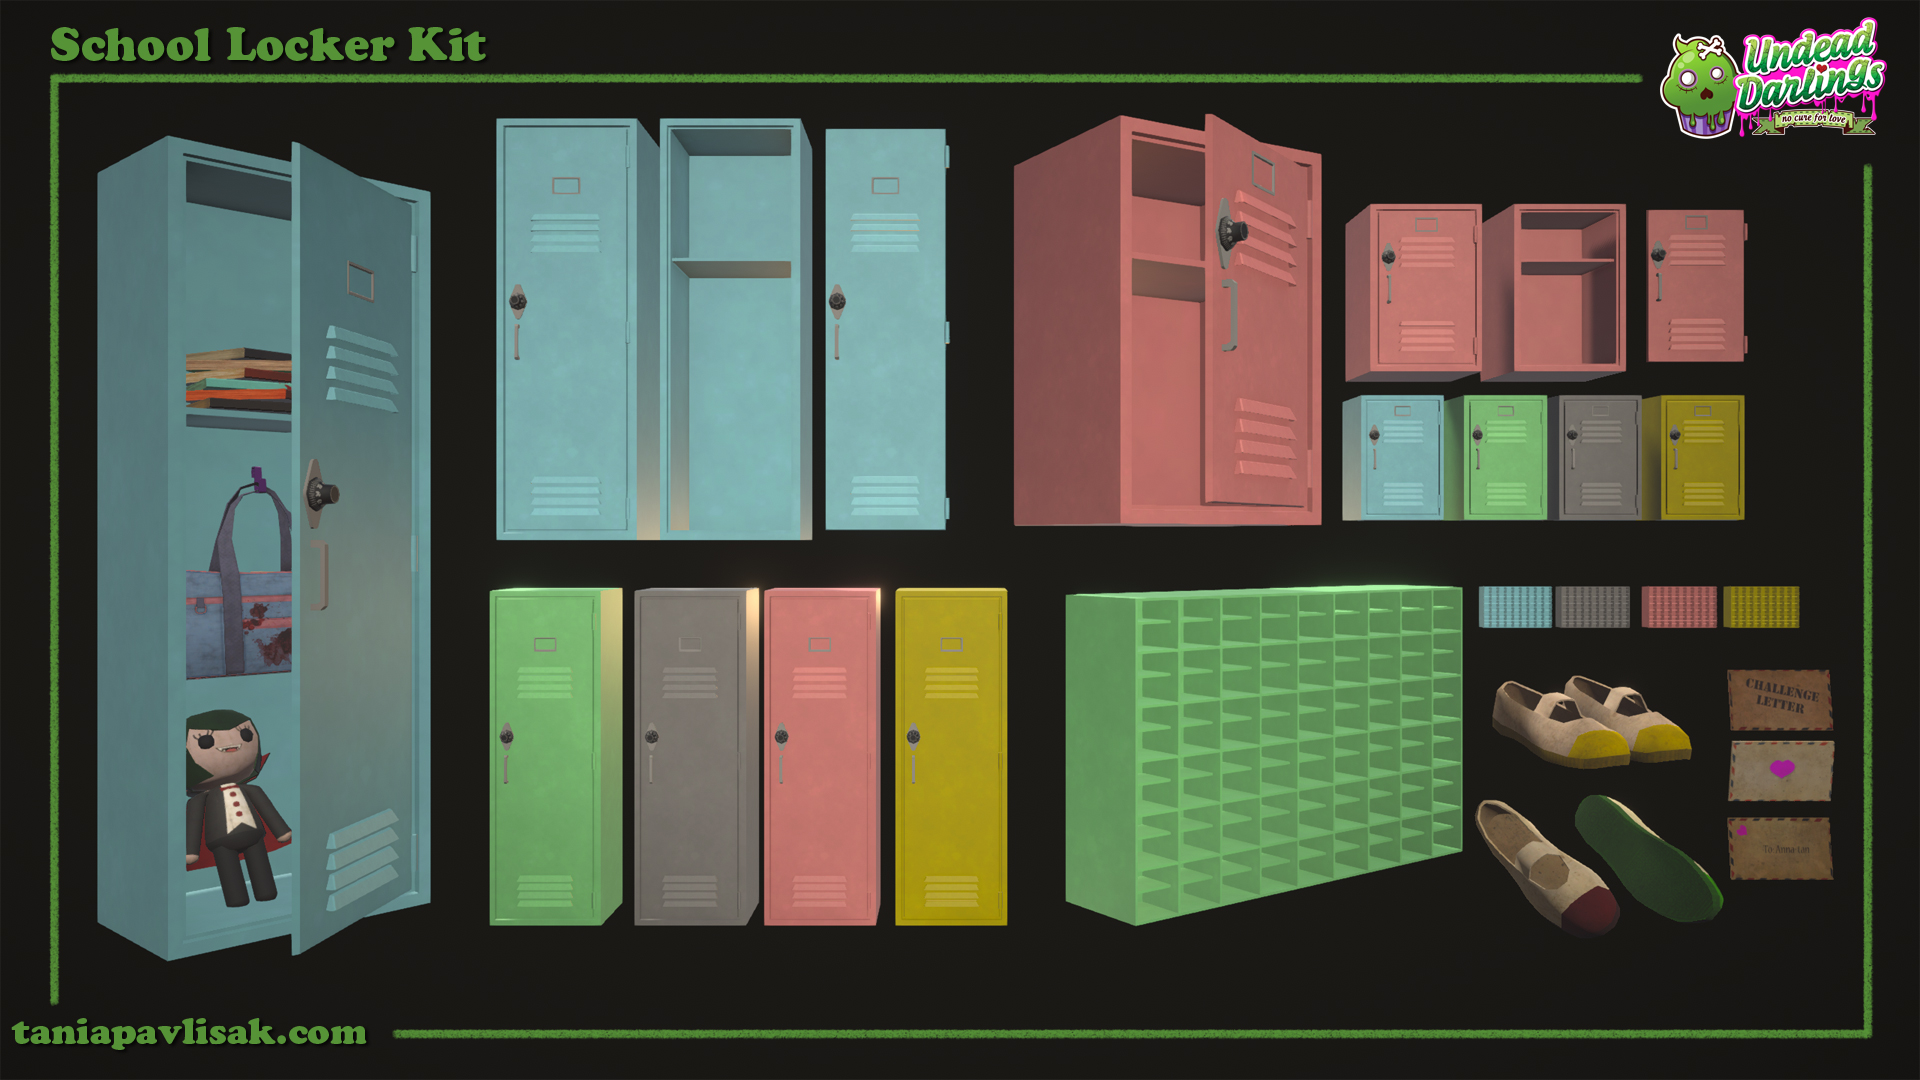 School locker variety - tall, half size, shoe locker, shoes and challenge/love letters